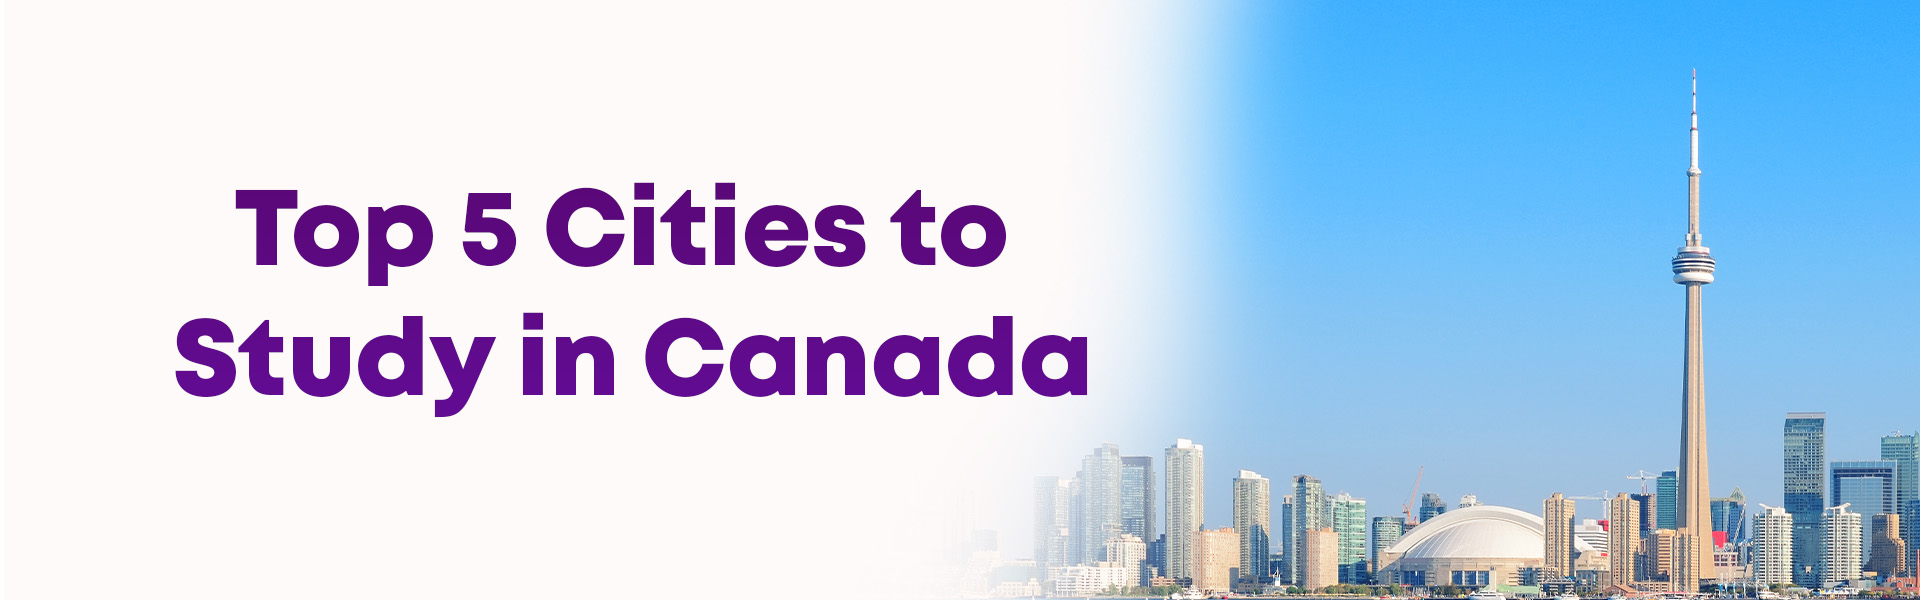 Top 5 Cities to Study in Canada